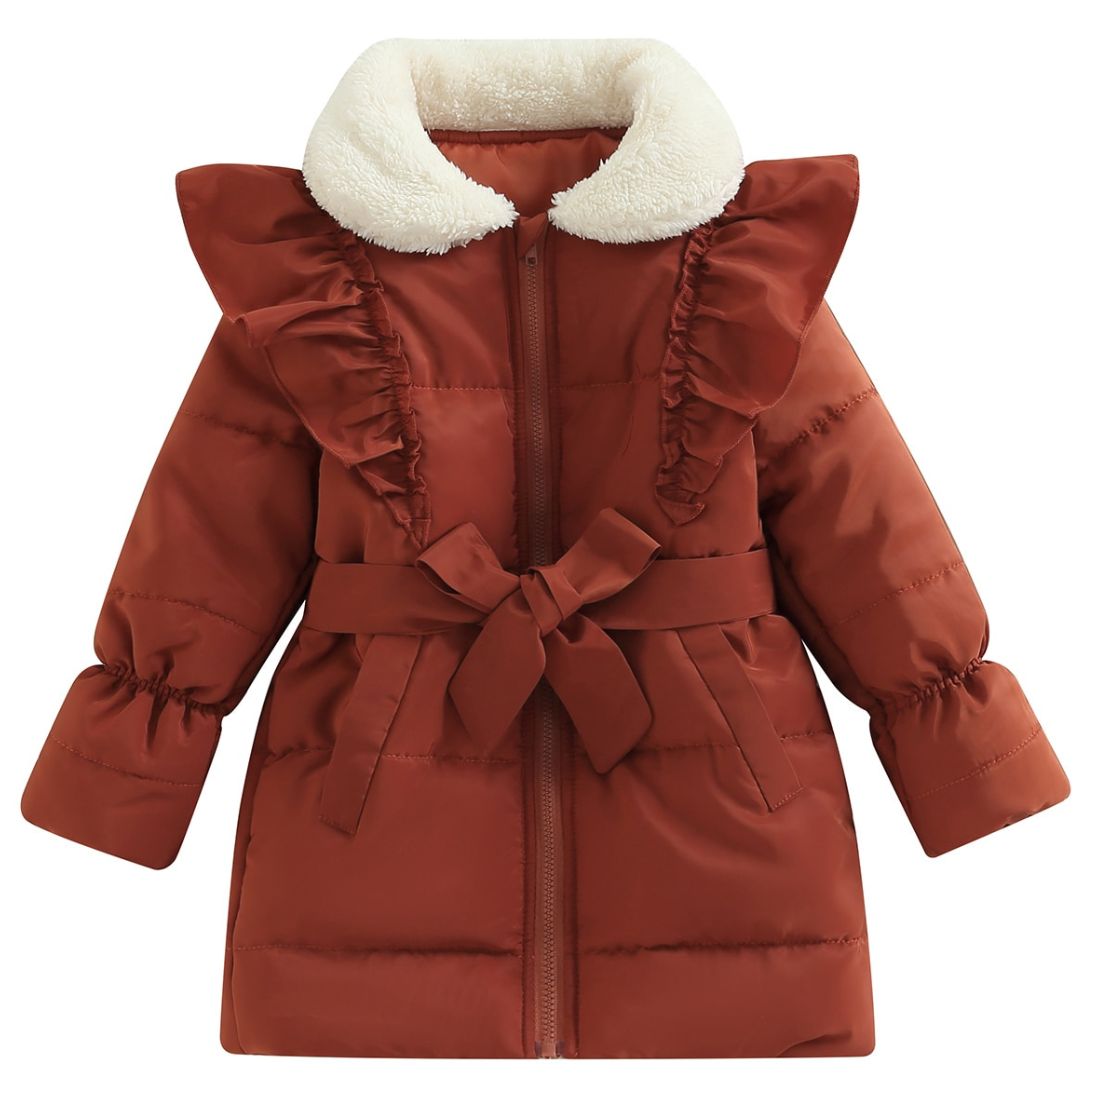 Little Girl Long Sleeve Ruffled Toddler Jacket - My Trendy Youngsters | Buy on-trend and stylish Baby and Toddler Winter Threads @ My Trendy Youngsters - Dress your little one in Style @ My Trendy Youngsters 